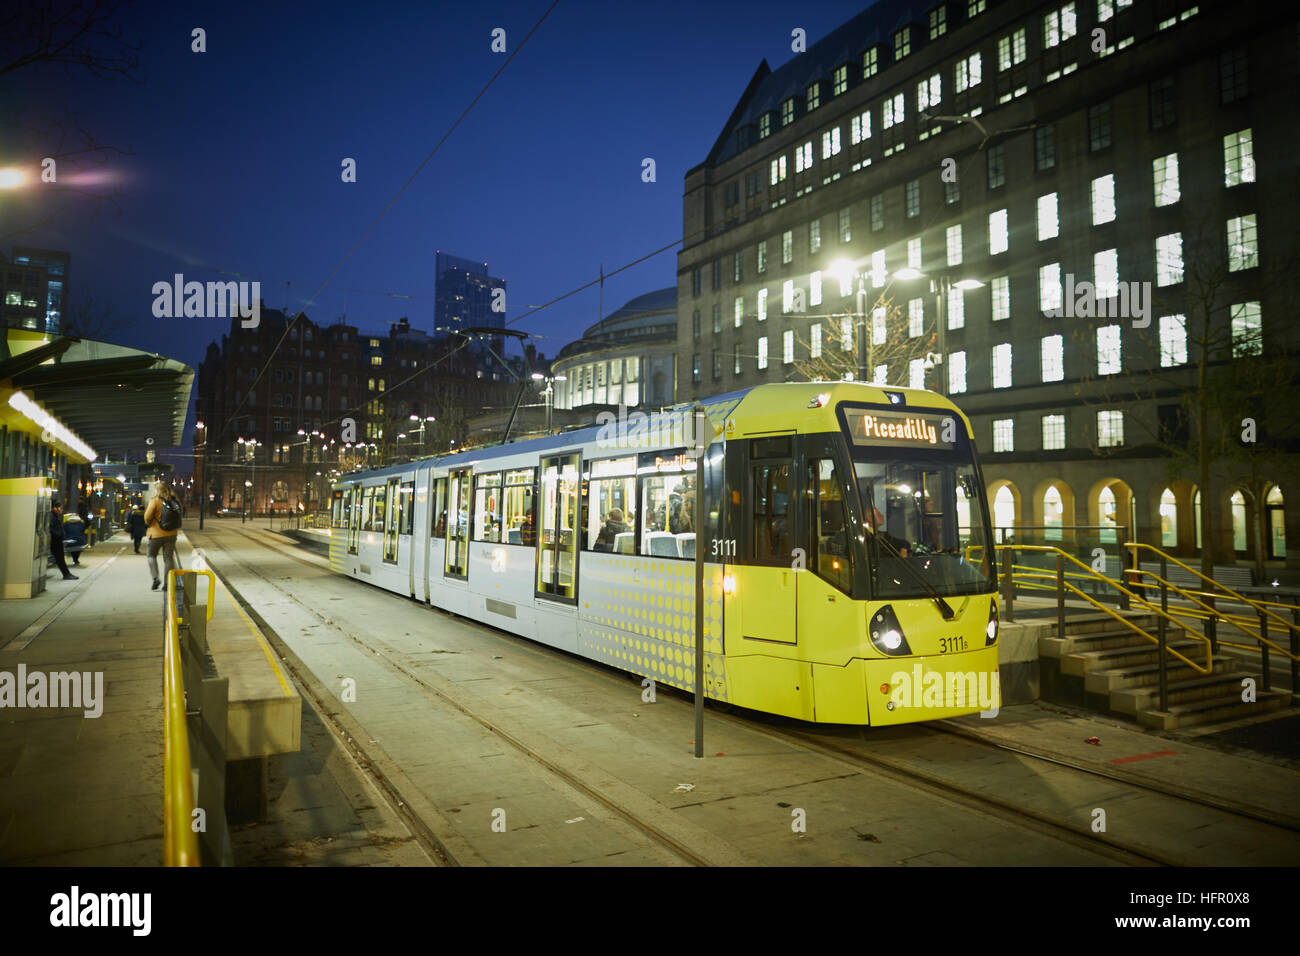 Manchester Peters square metrolink tram   Dusk Dawn evening daybreak night Transport transporter transportation transported traveling getting about by Stock Photo